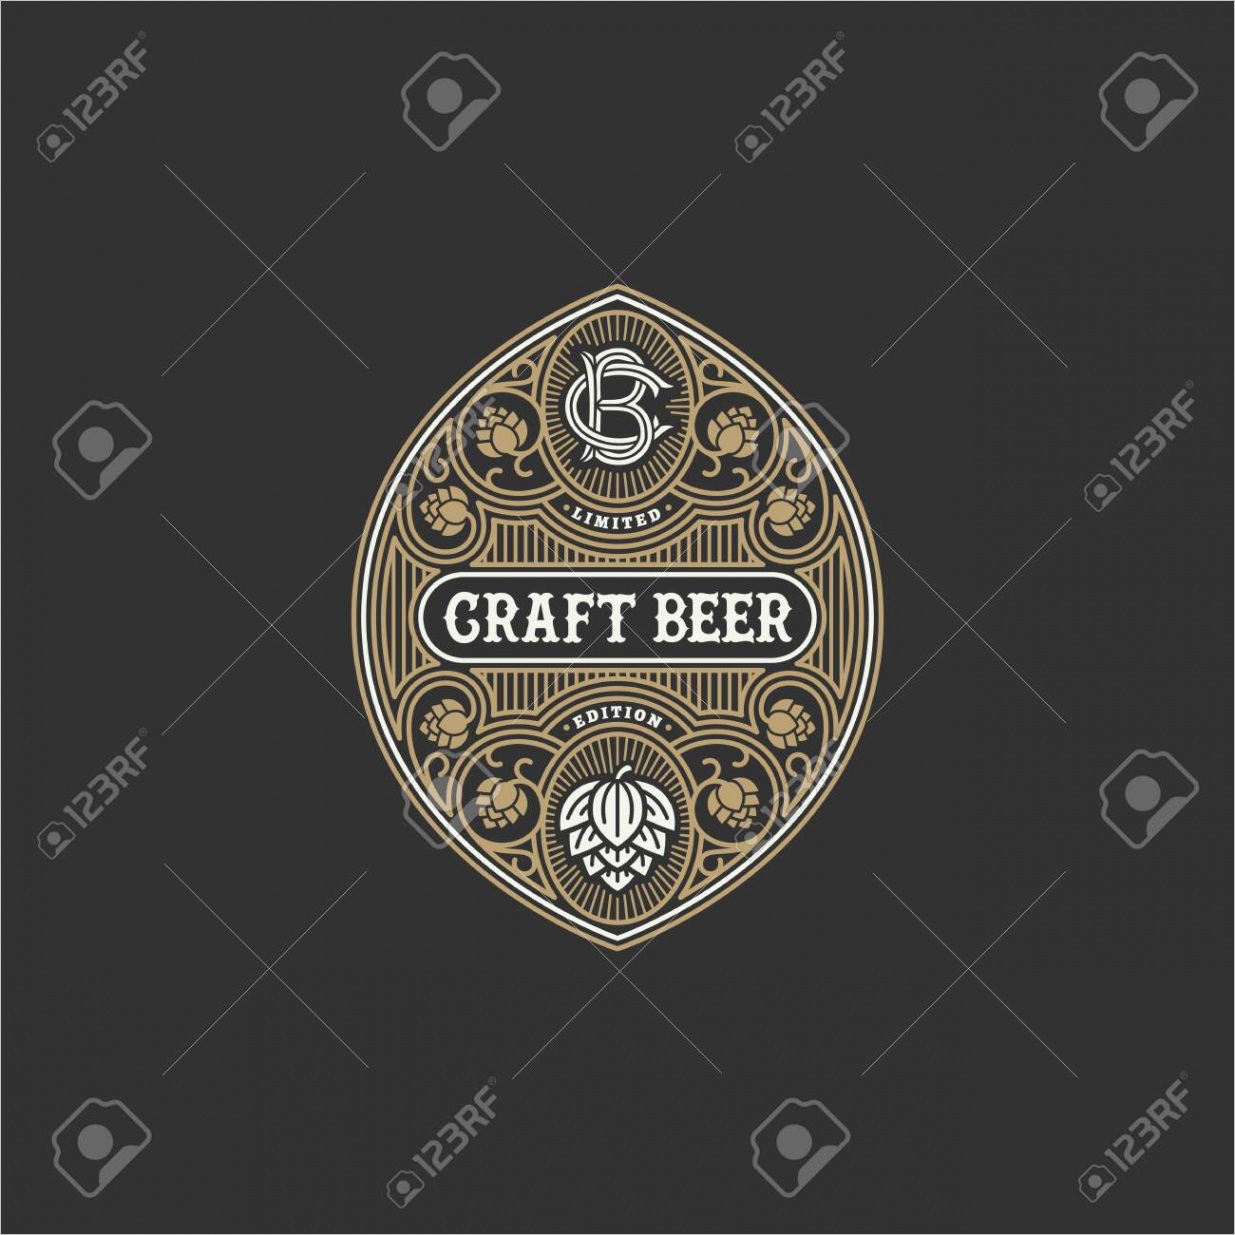 photo stock vector flourishes beer label design template with hops vector illustration